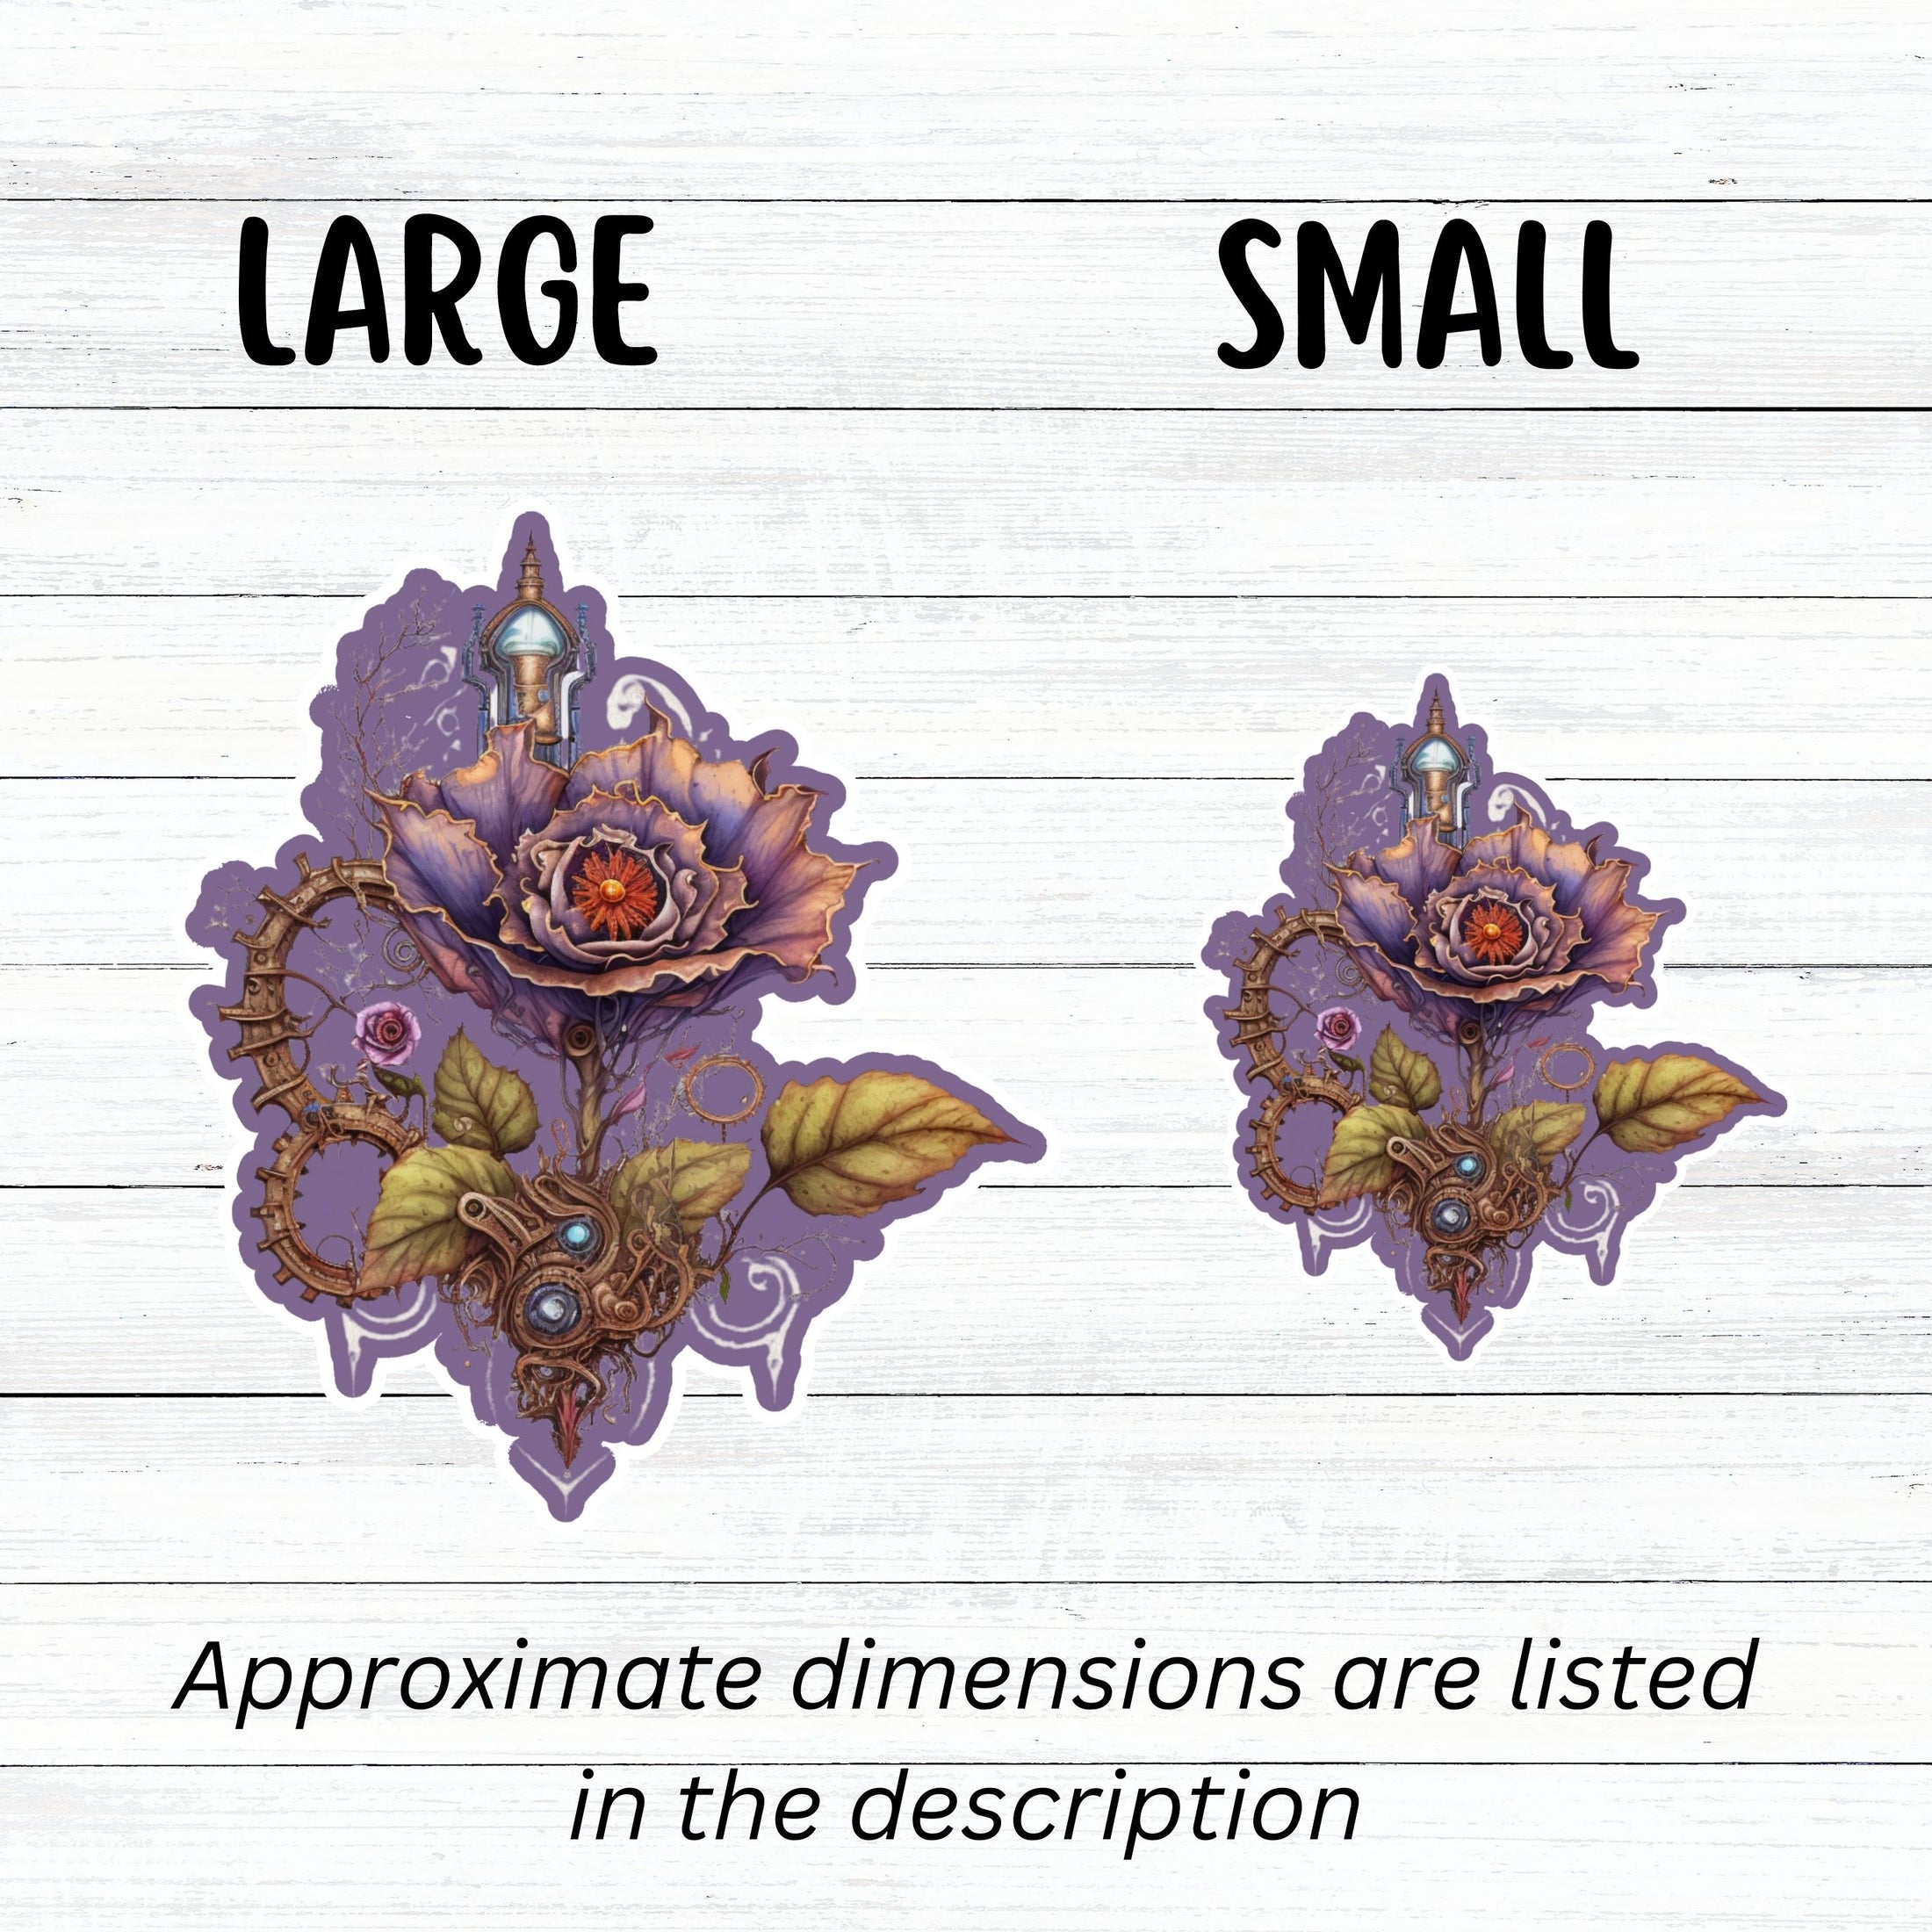 This image shows large and small steampunk rose stickers next to each other.